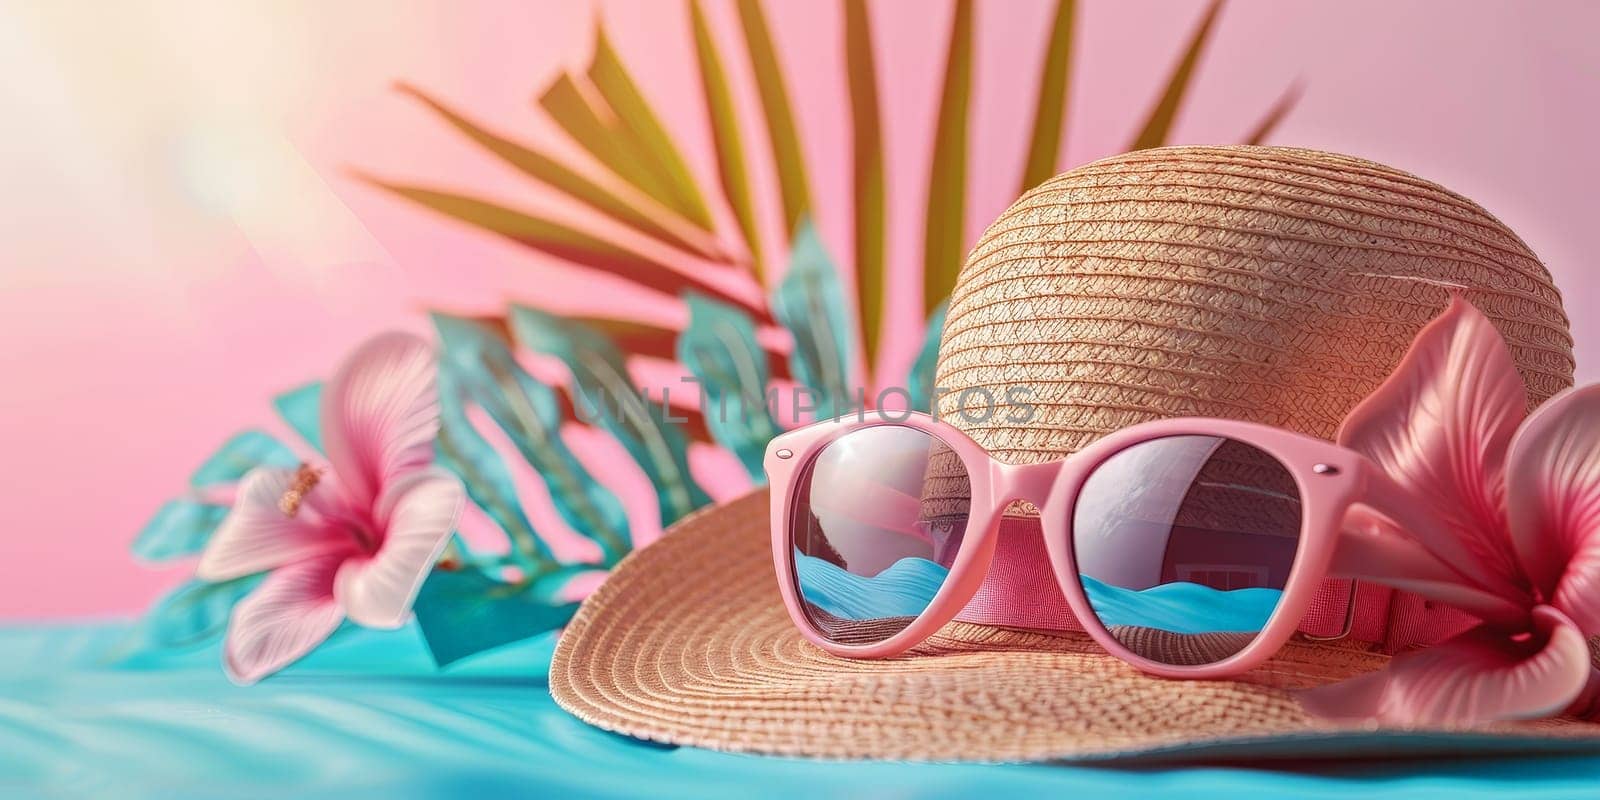 A pink straw hat with sunglasses sits on a table next to a pink flower. The hat and sunglasses give off a fun and playful vibe, while the pink flower adds a touch of romance and femininity